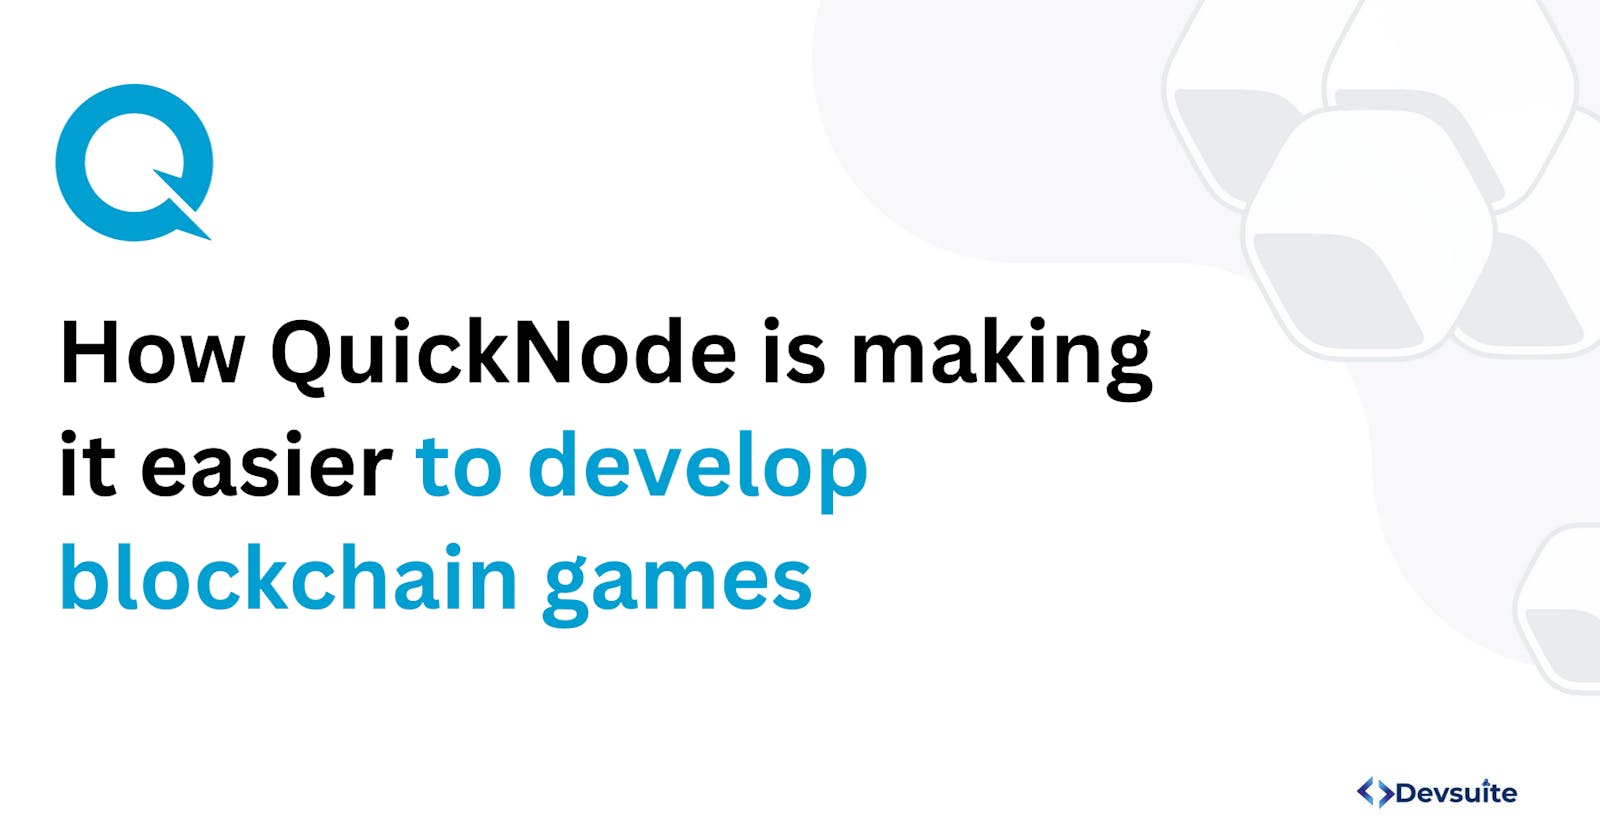 How QuickNode is making it easier to develop blockchain games